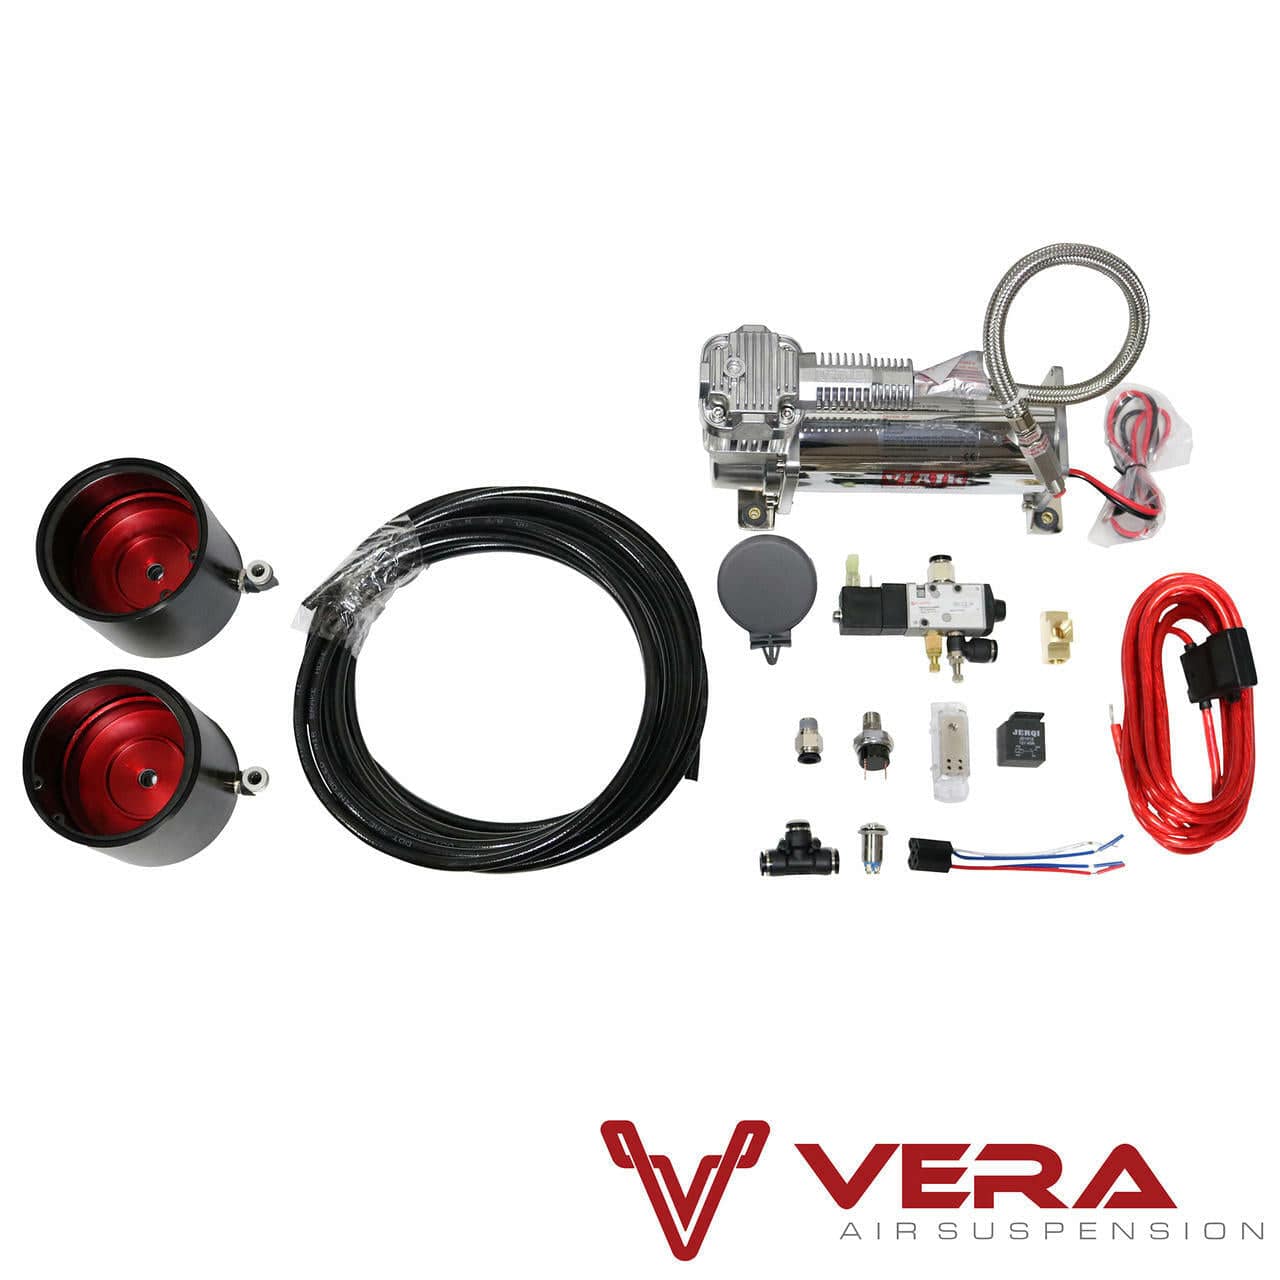 VERA V-ACK Air Cups - Gold Tankless Control System